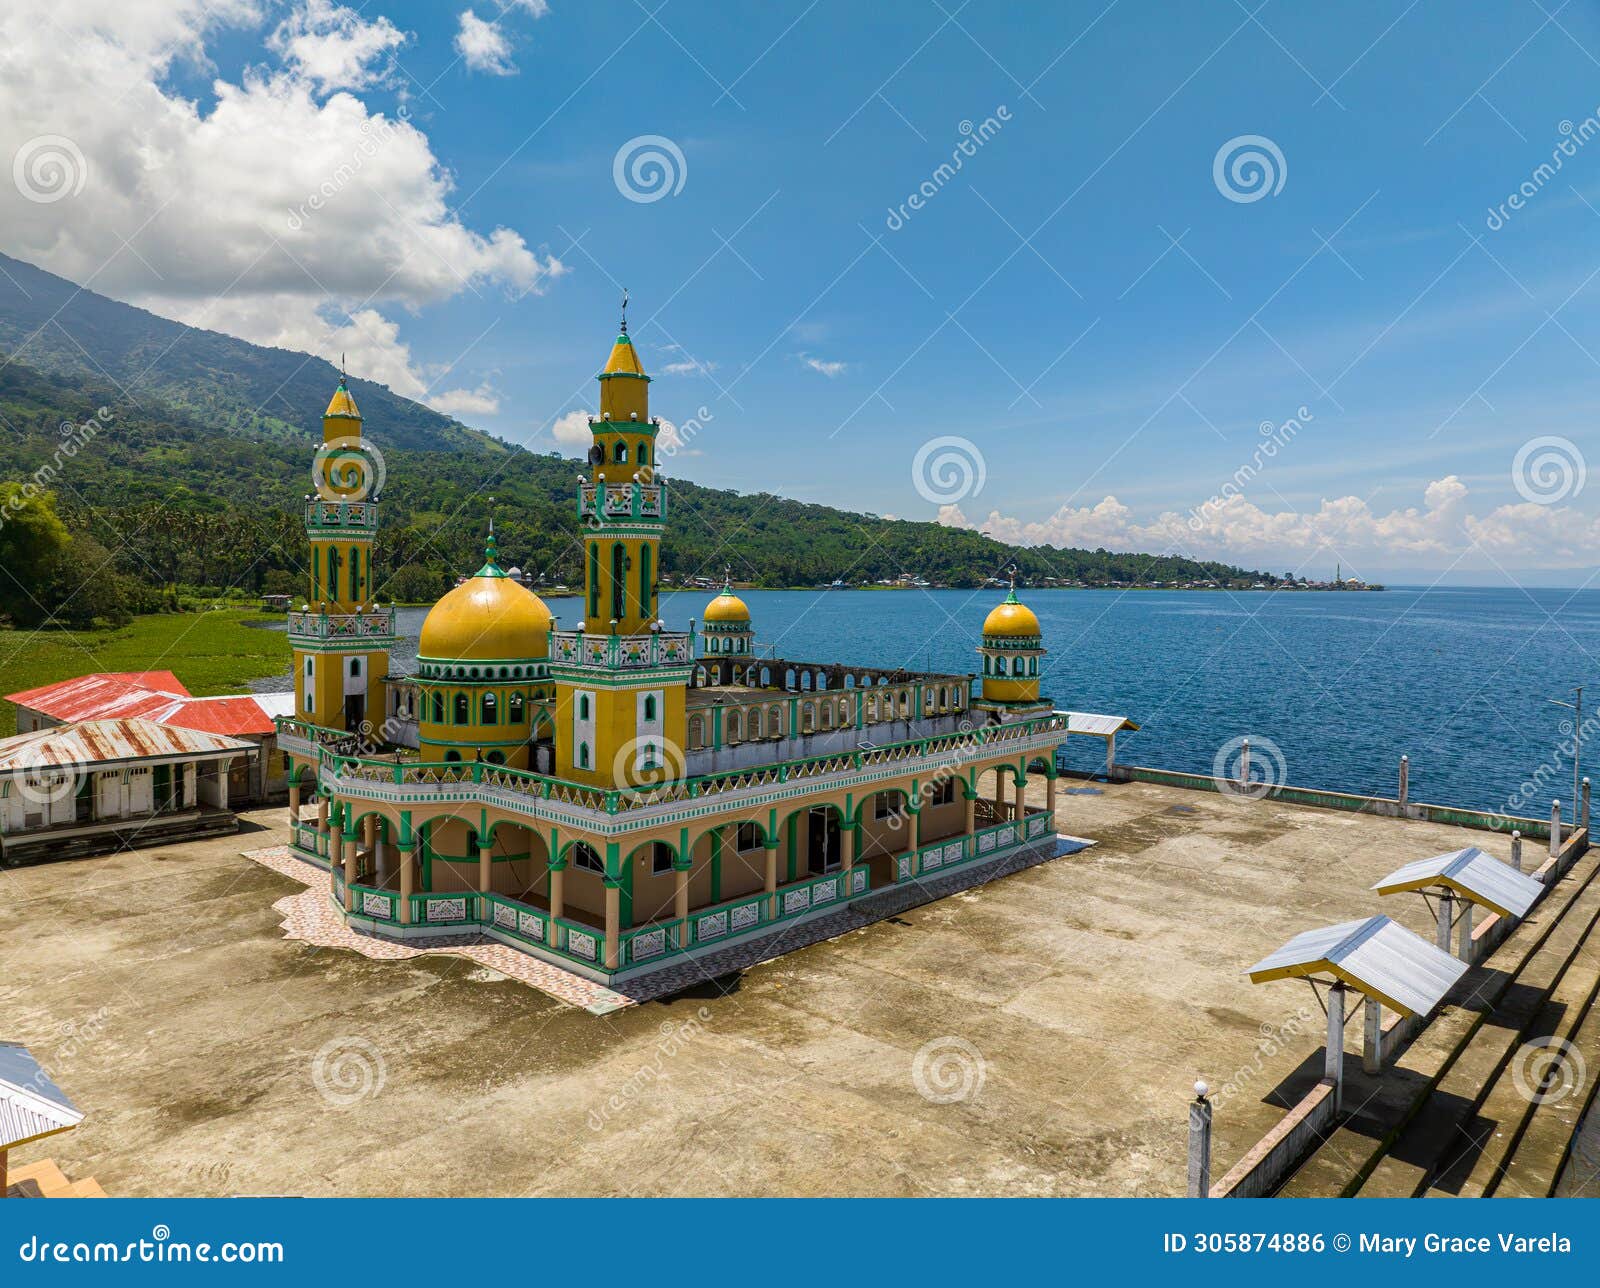 linuk masjid and lake lanao in lanao del sur. philippines.